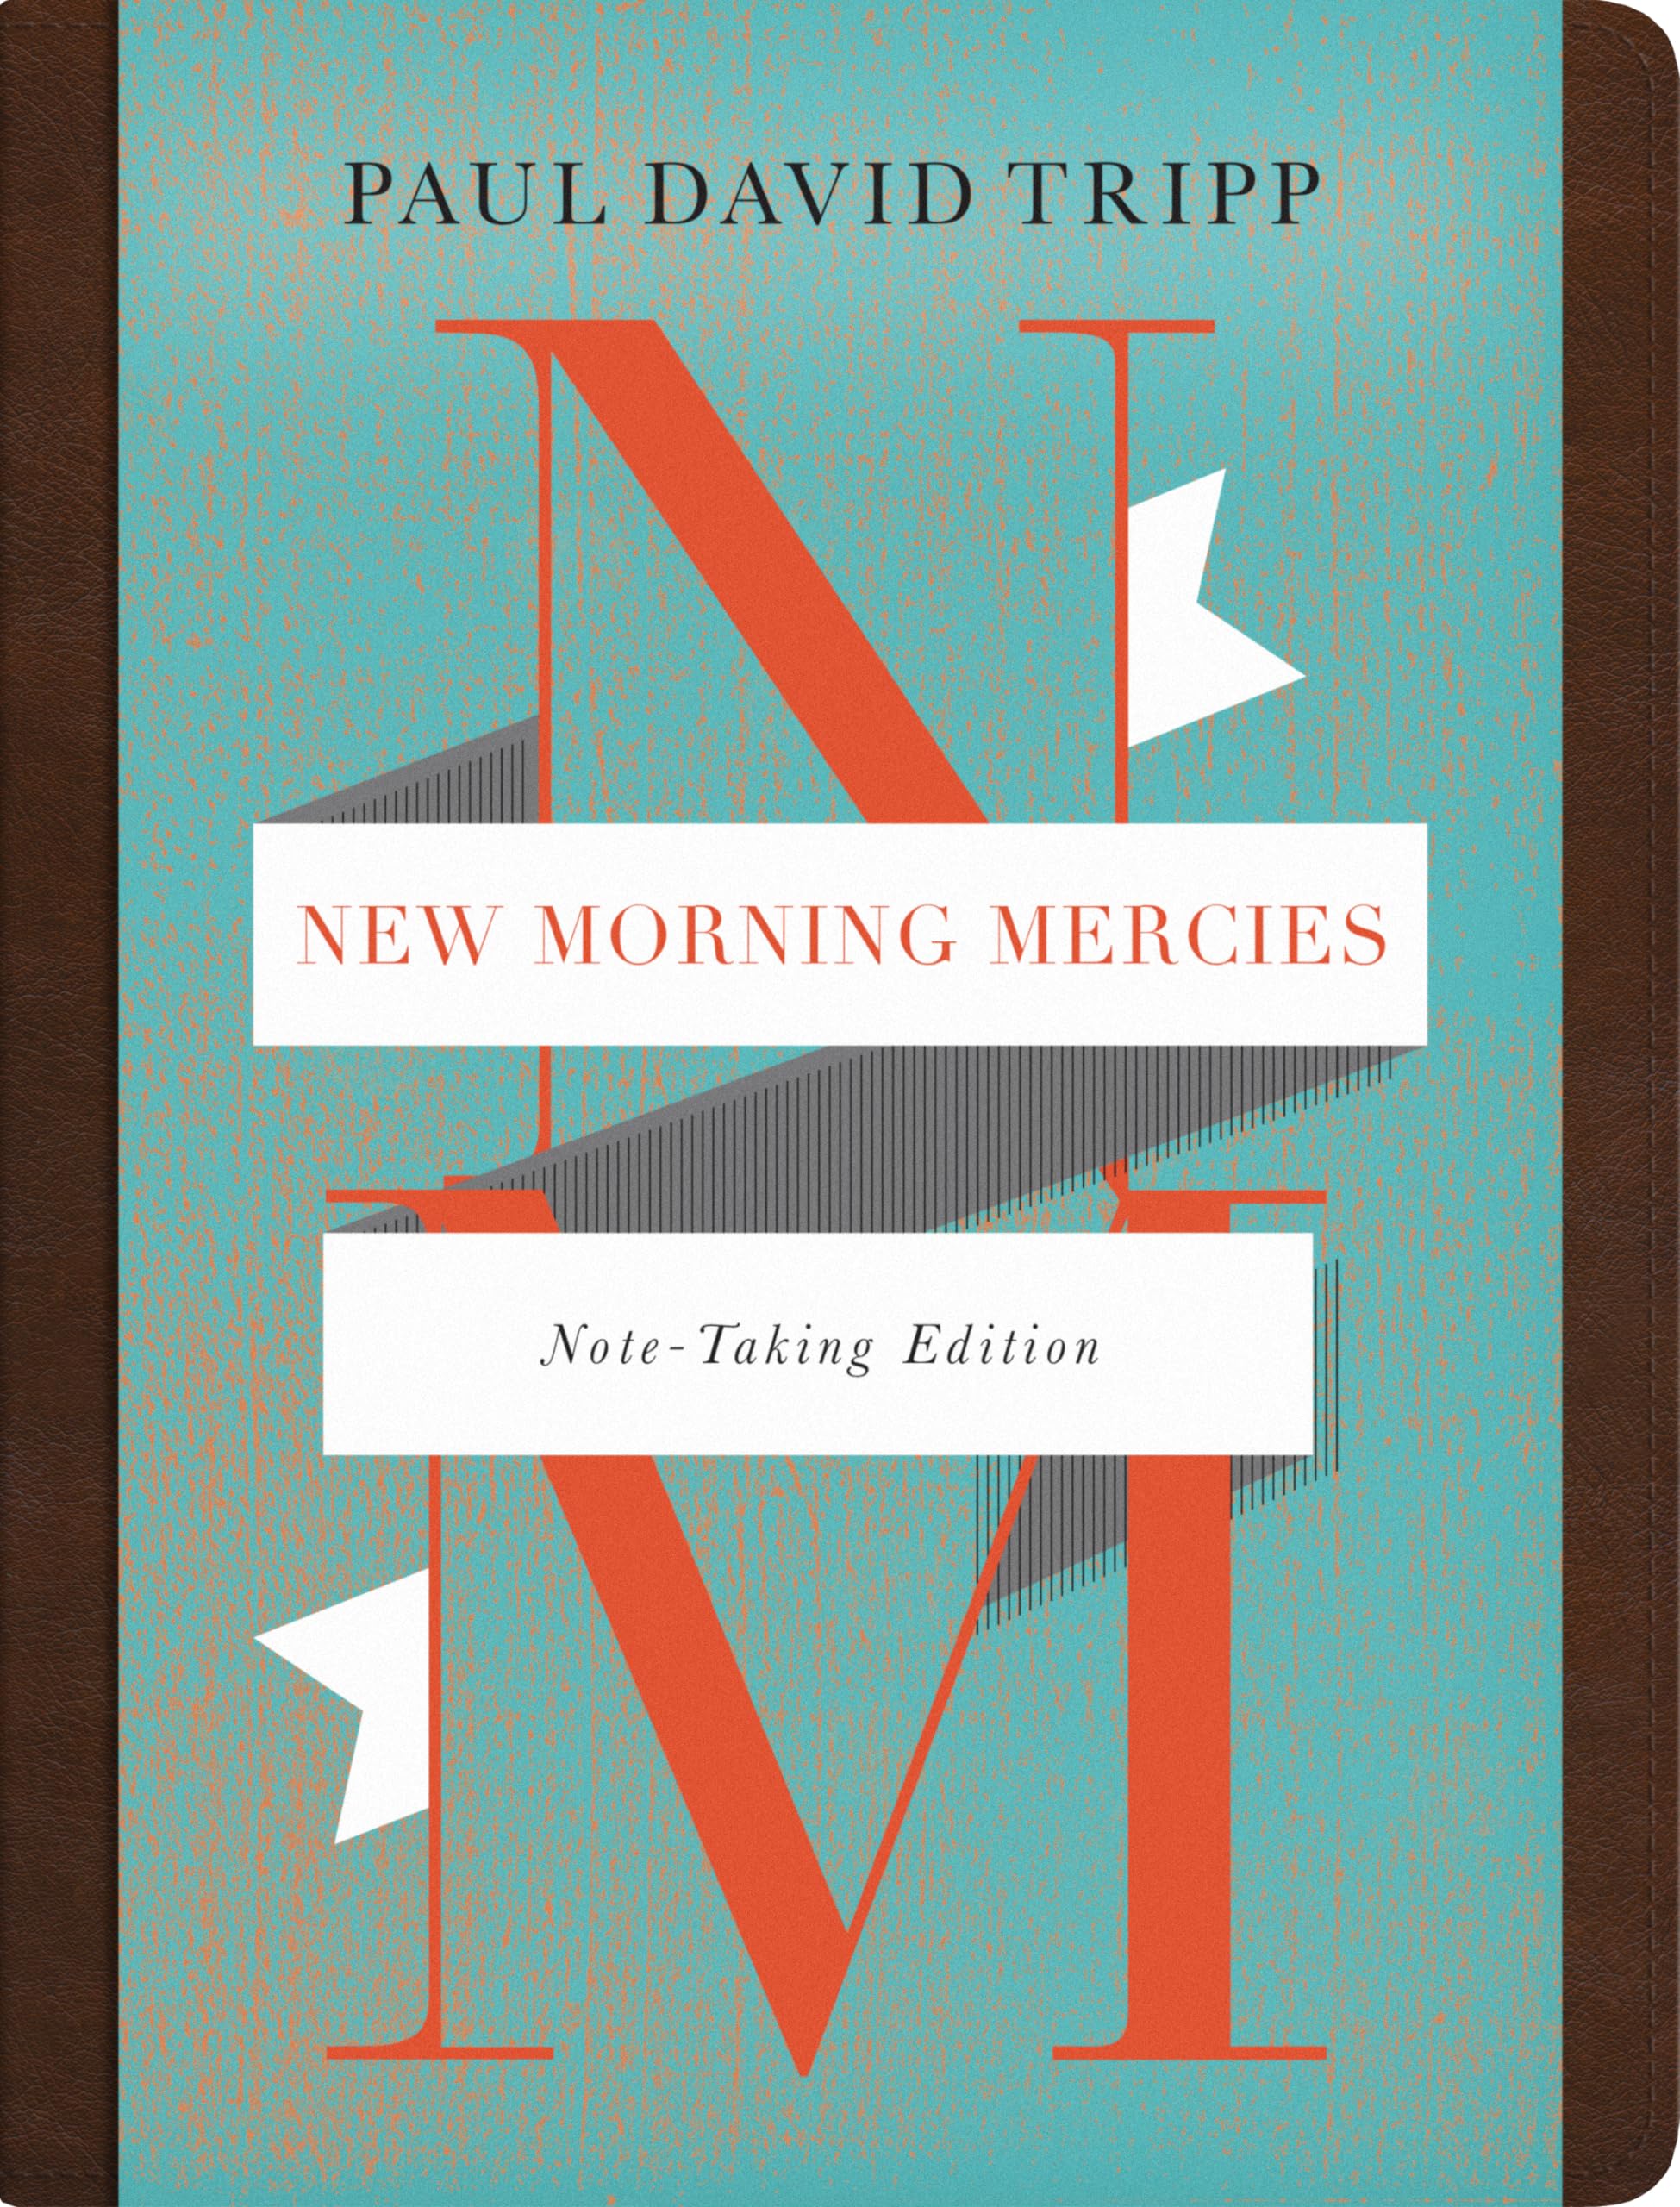 New Morning Mercies (Note-Taking Edition) by Tripp, Paul David